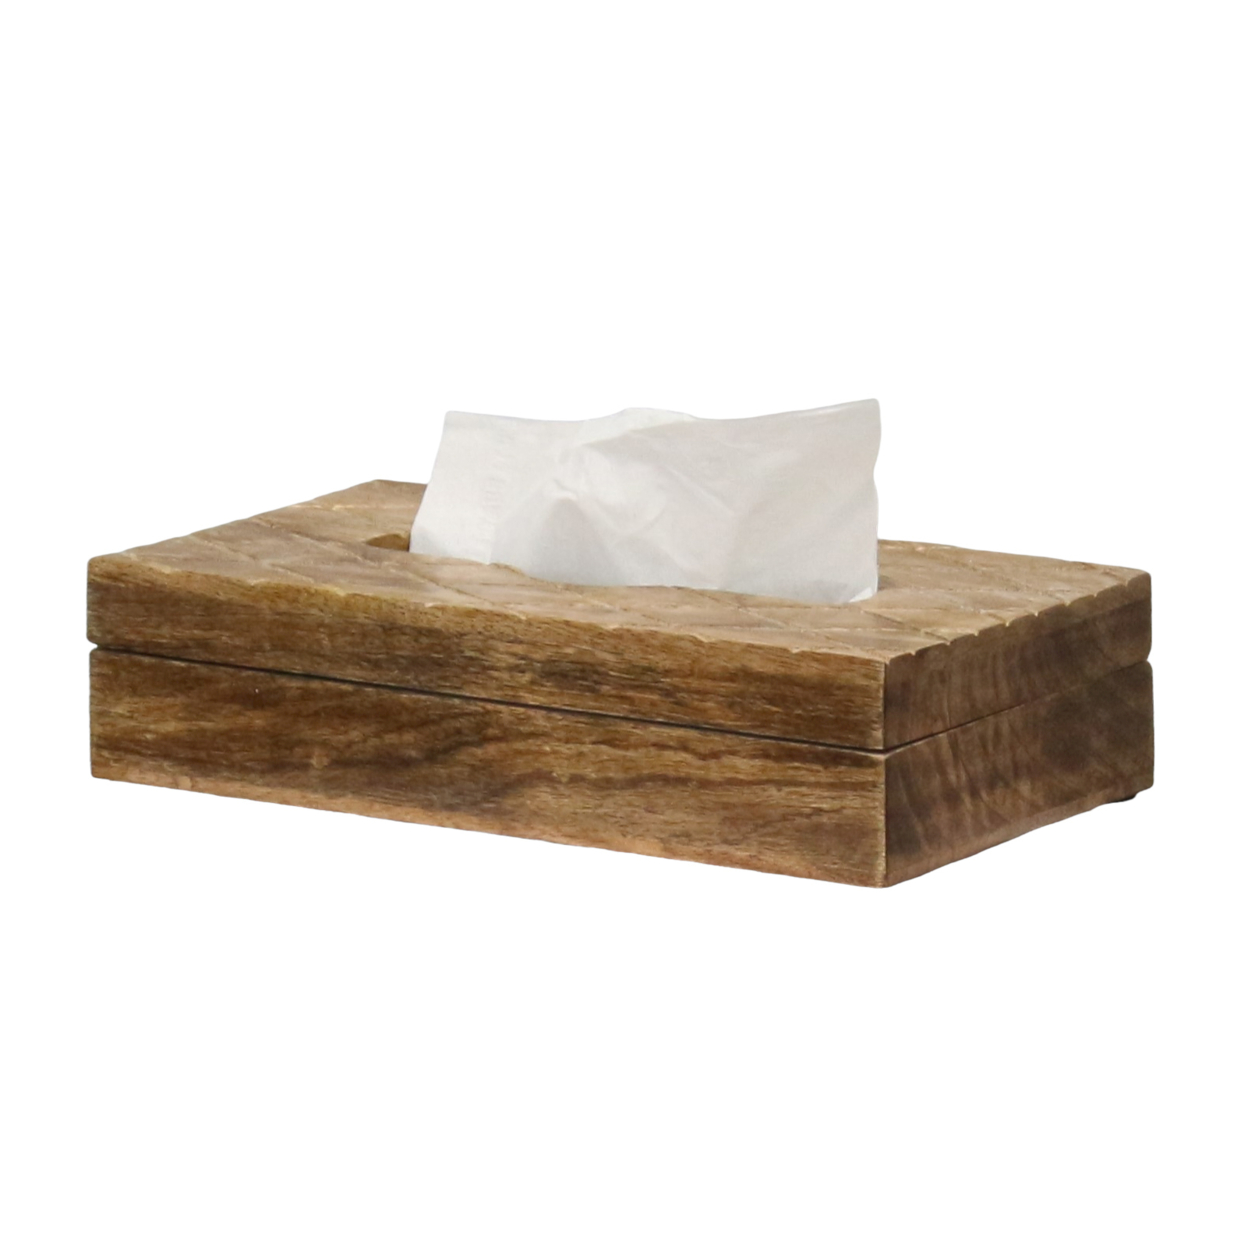 Modern Decorative Paper Facial Tissue Box Holder For Kitchen, Dining Room, And Office - Rectangle